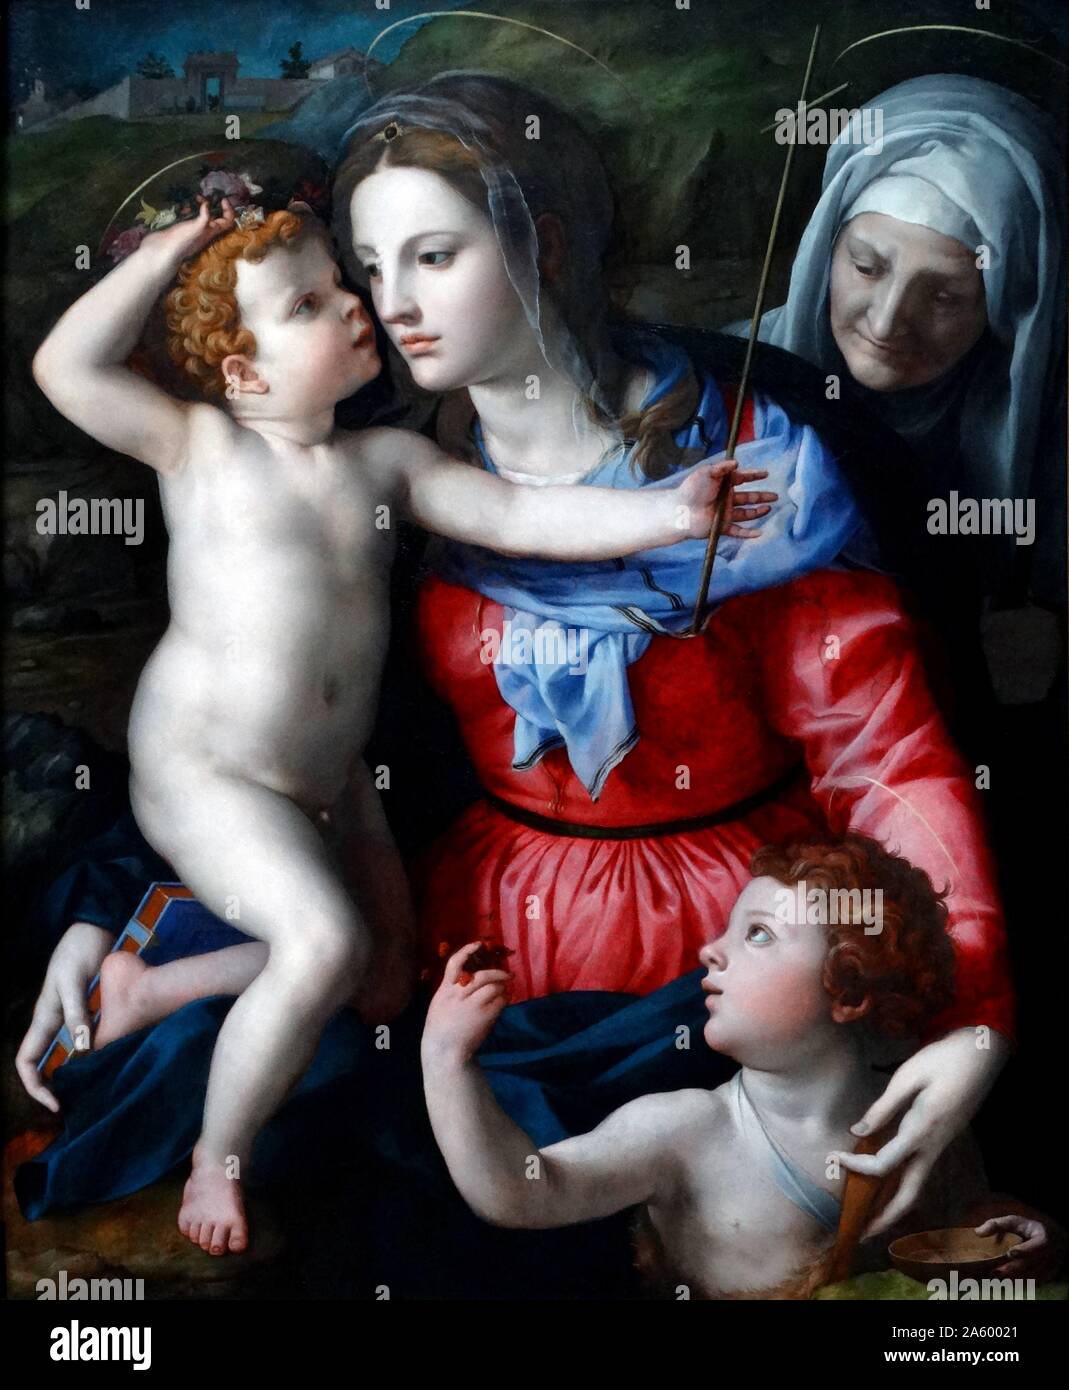 Painting titled 'The Madonna and Child with Saints' by Agnolo di Cosimo (1503-1572) Italian Mannerist painter from Florence. Dated 16th Century Stock Photo